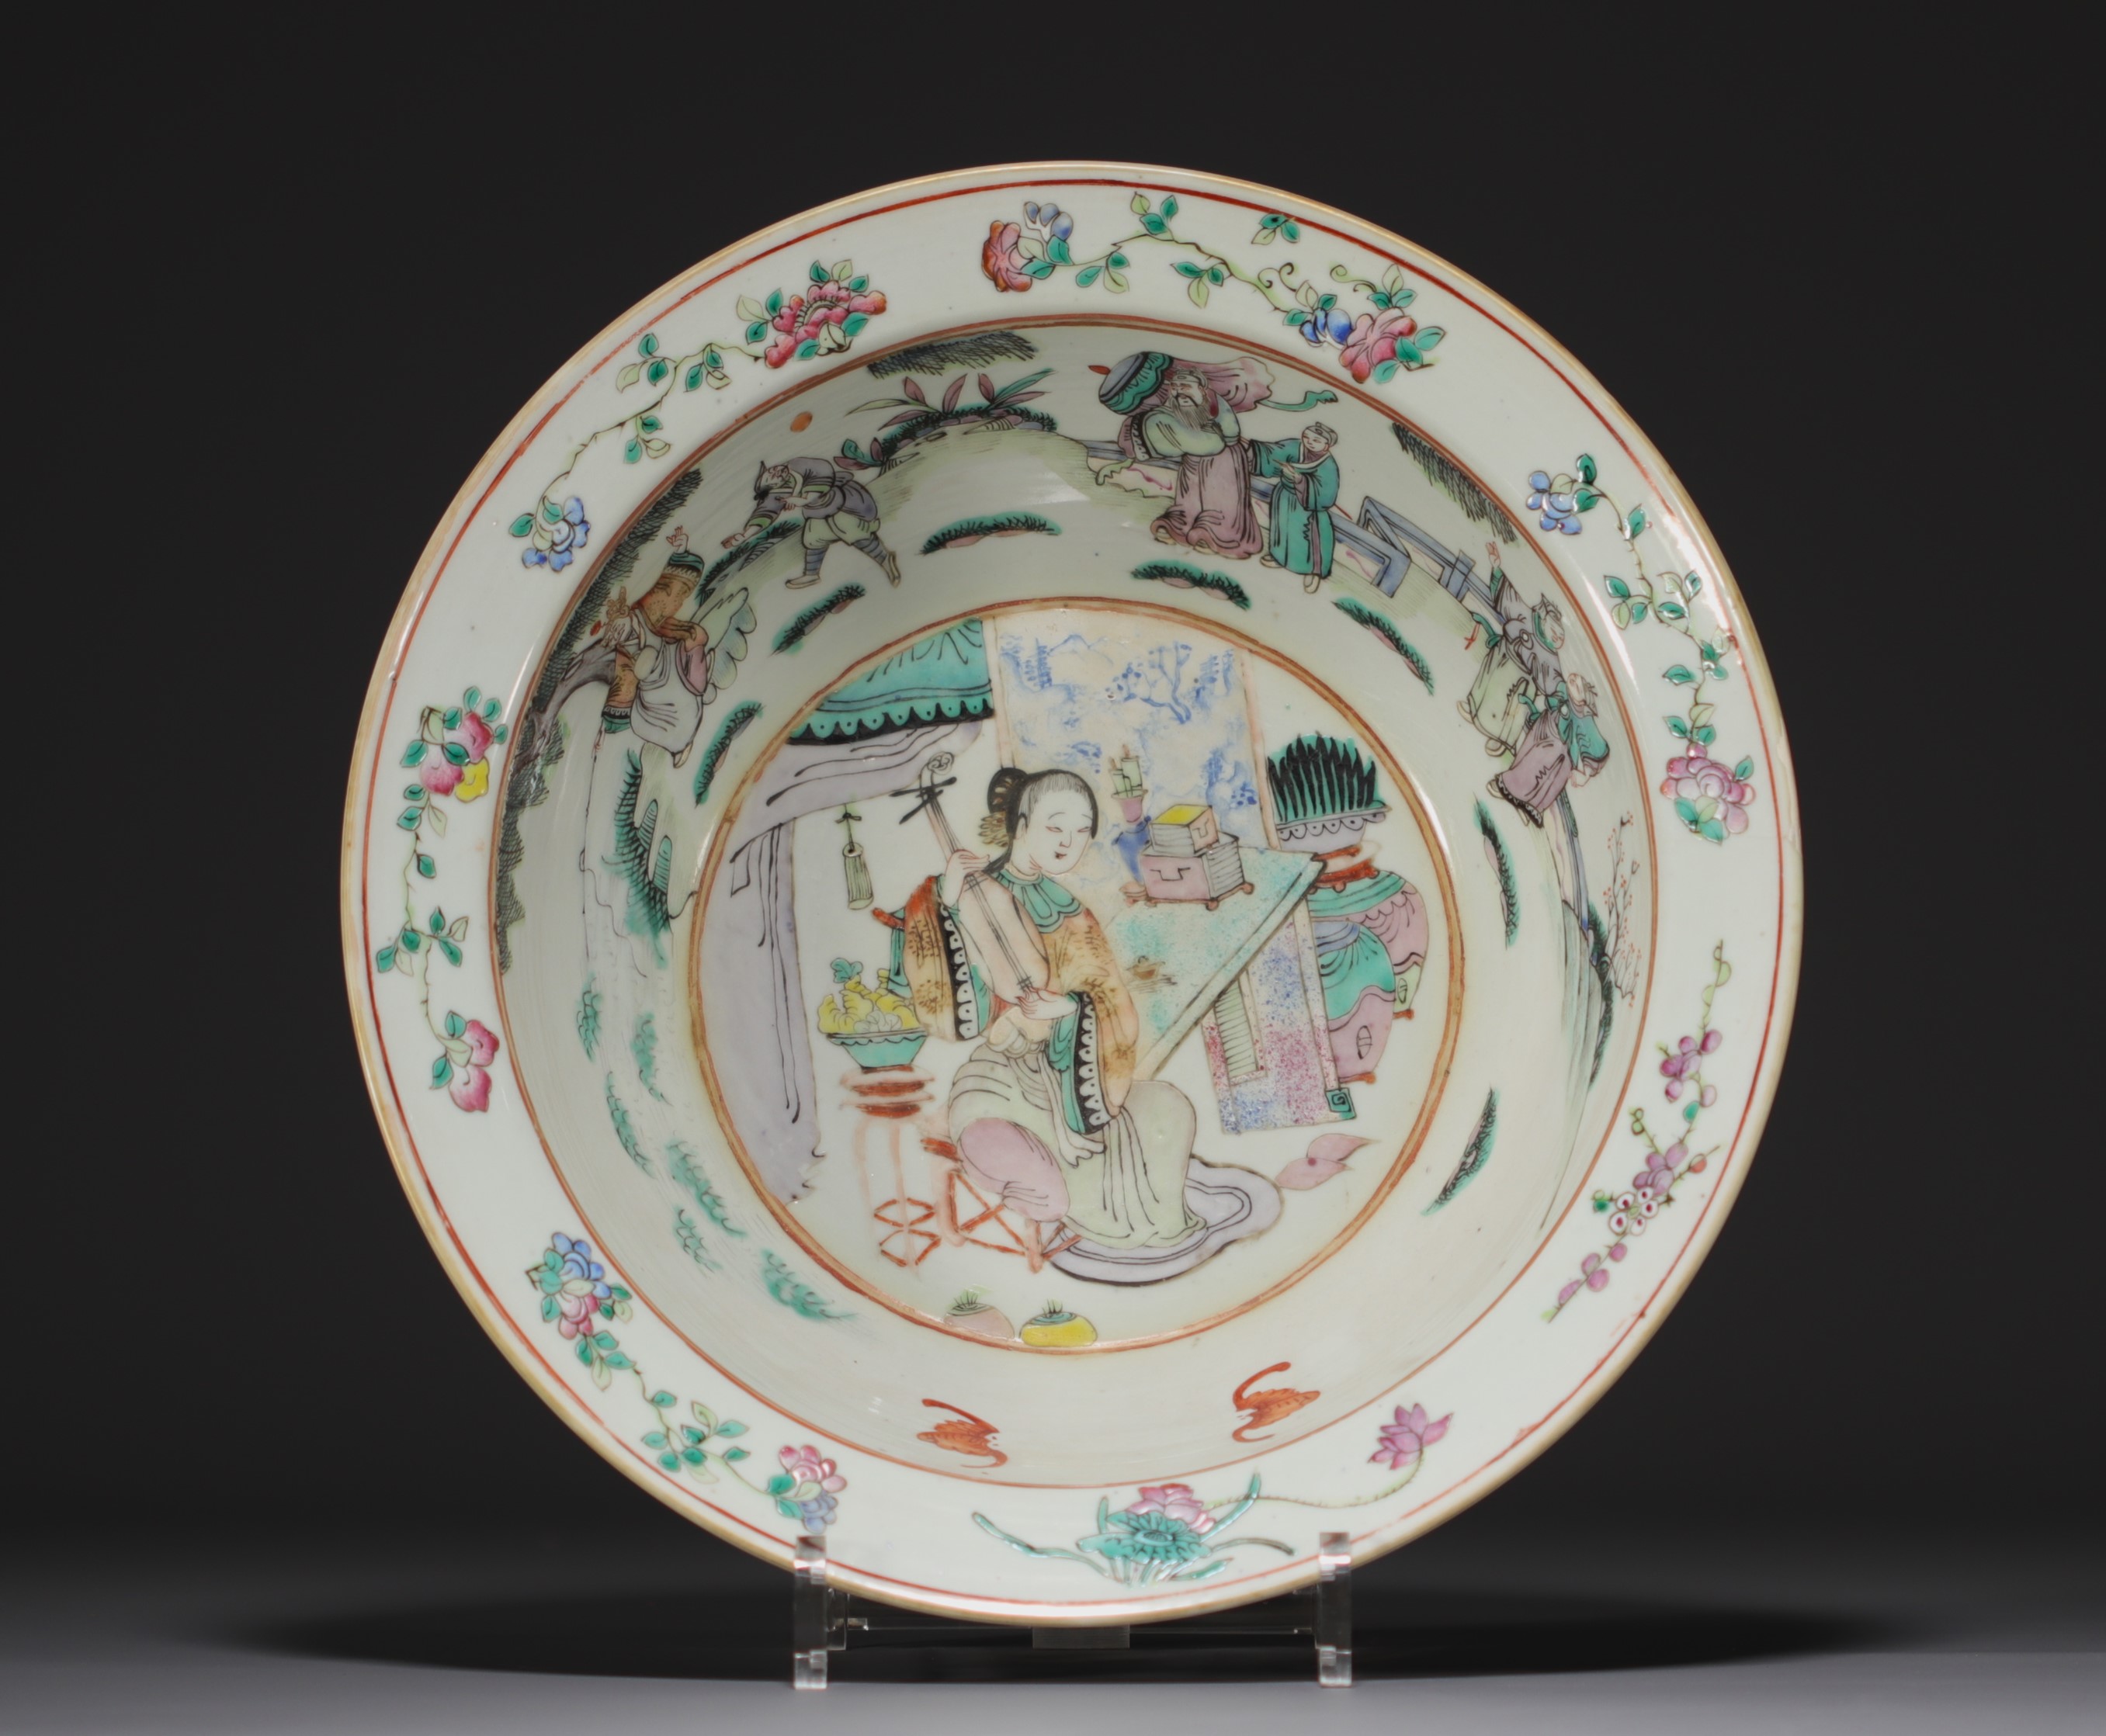 China - Pair of Famille Rose porcelain dishes decorated with figures, flowers and bats. - Image 2 of 5